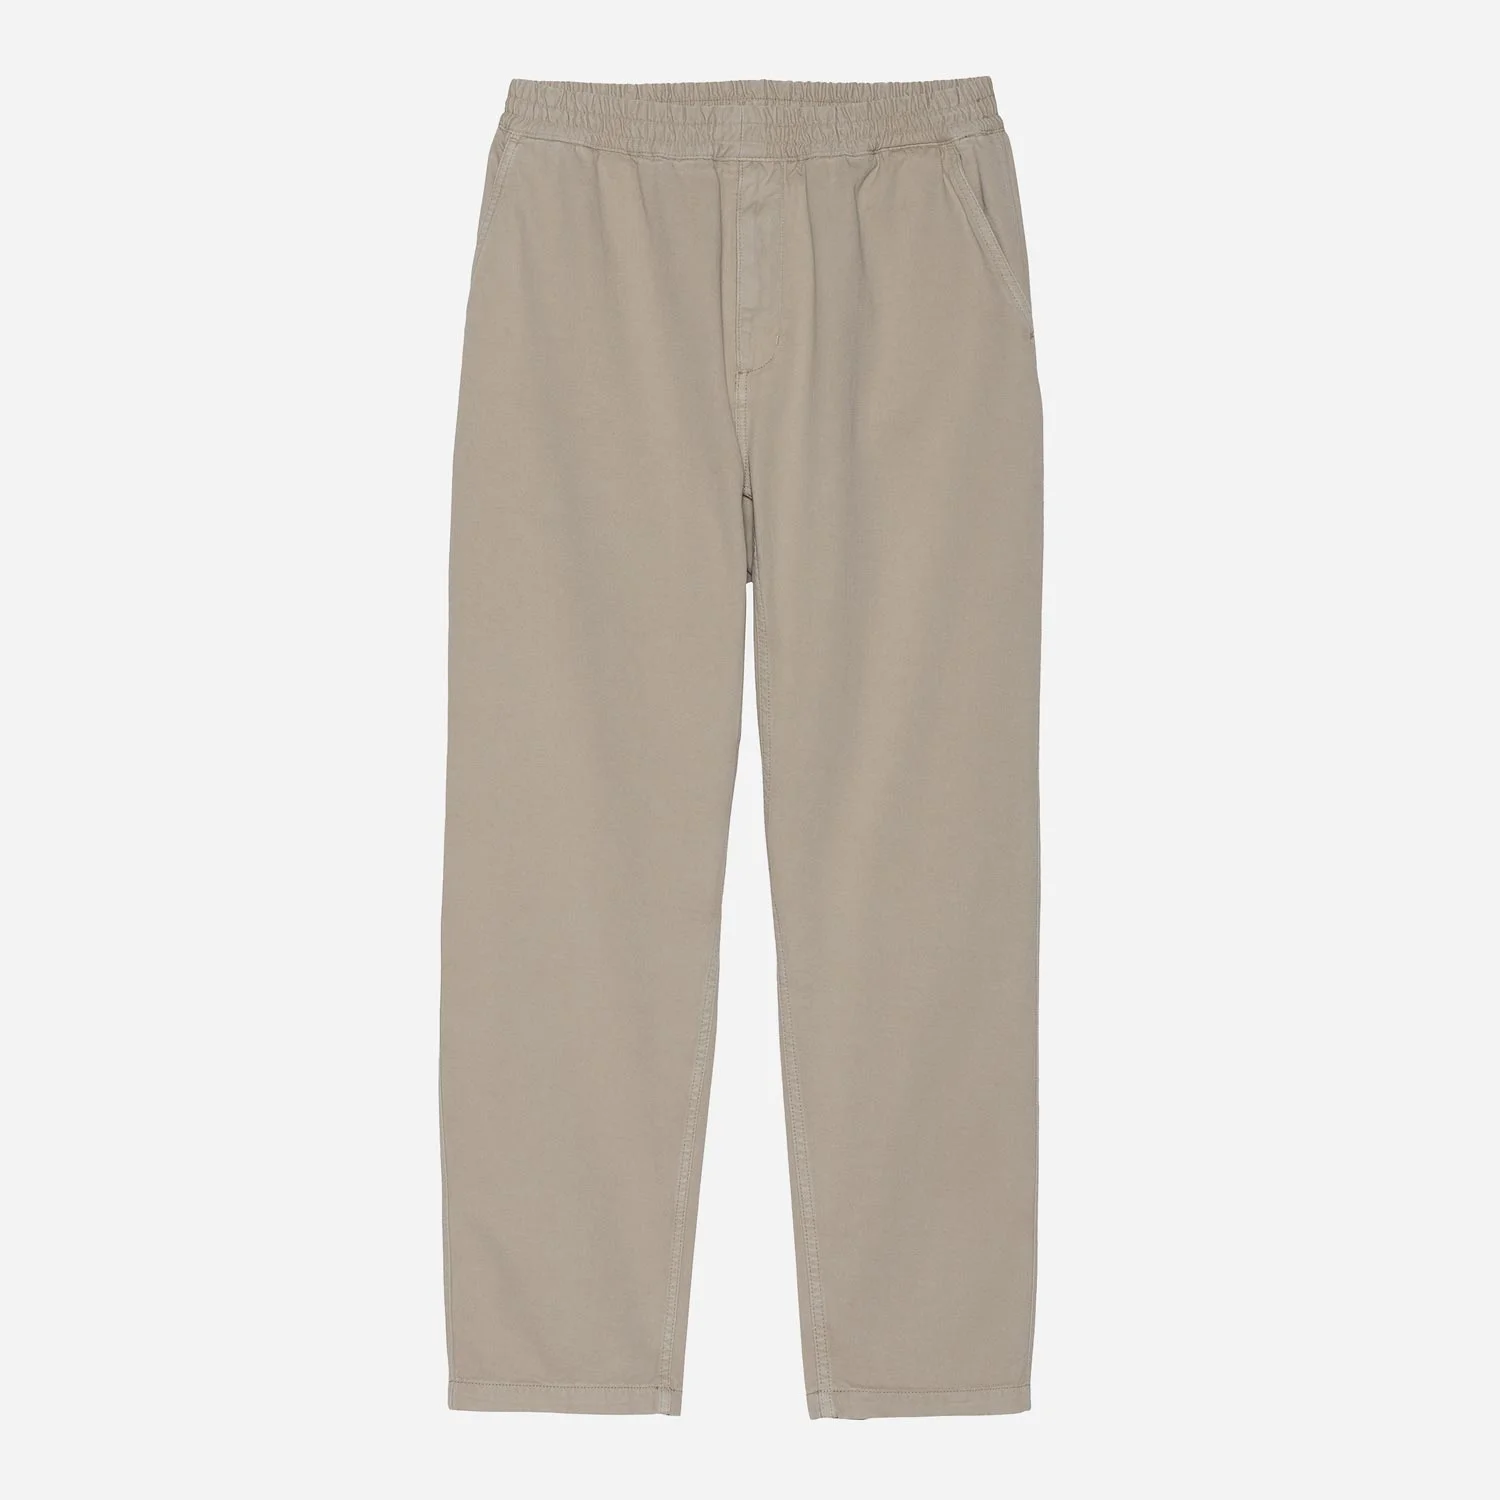 Carhartt WIP Flint Relaxed Fit Pant - Wall